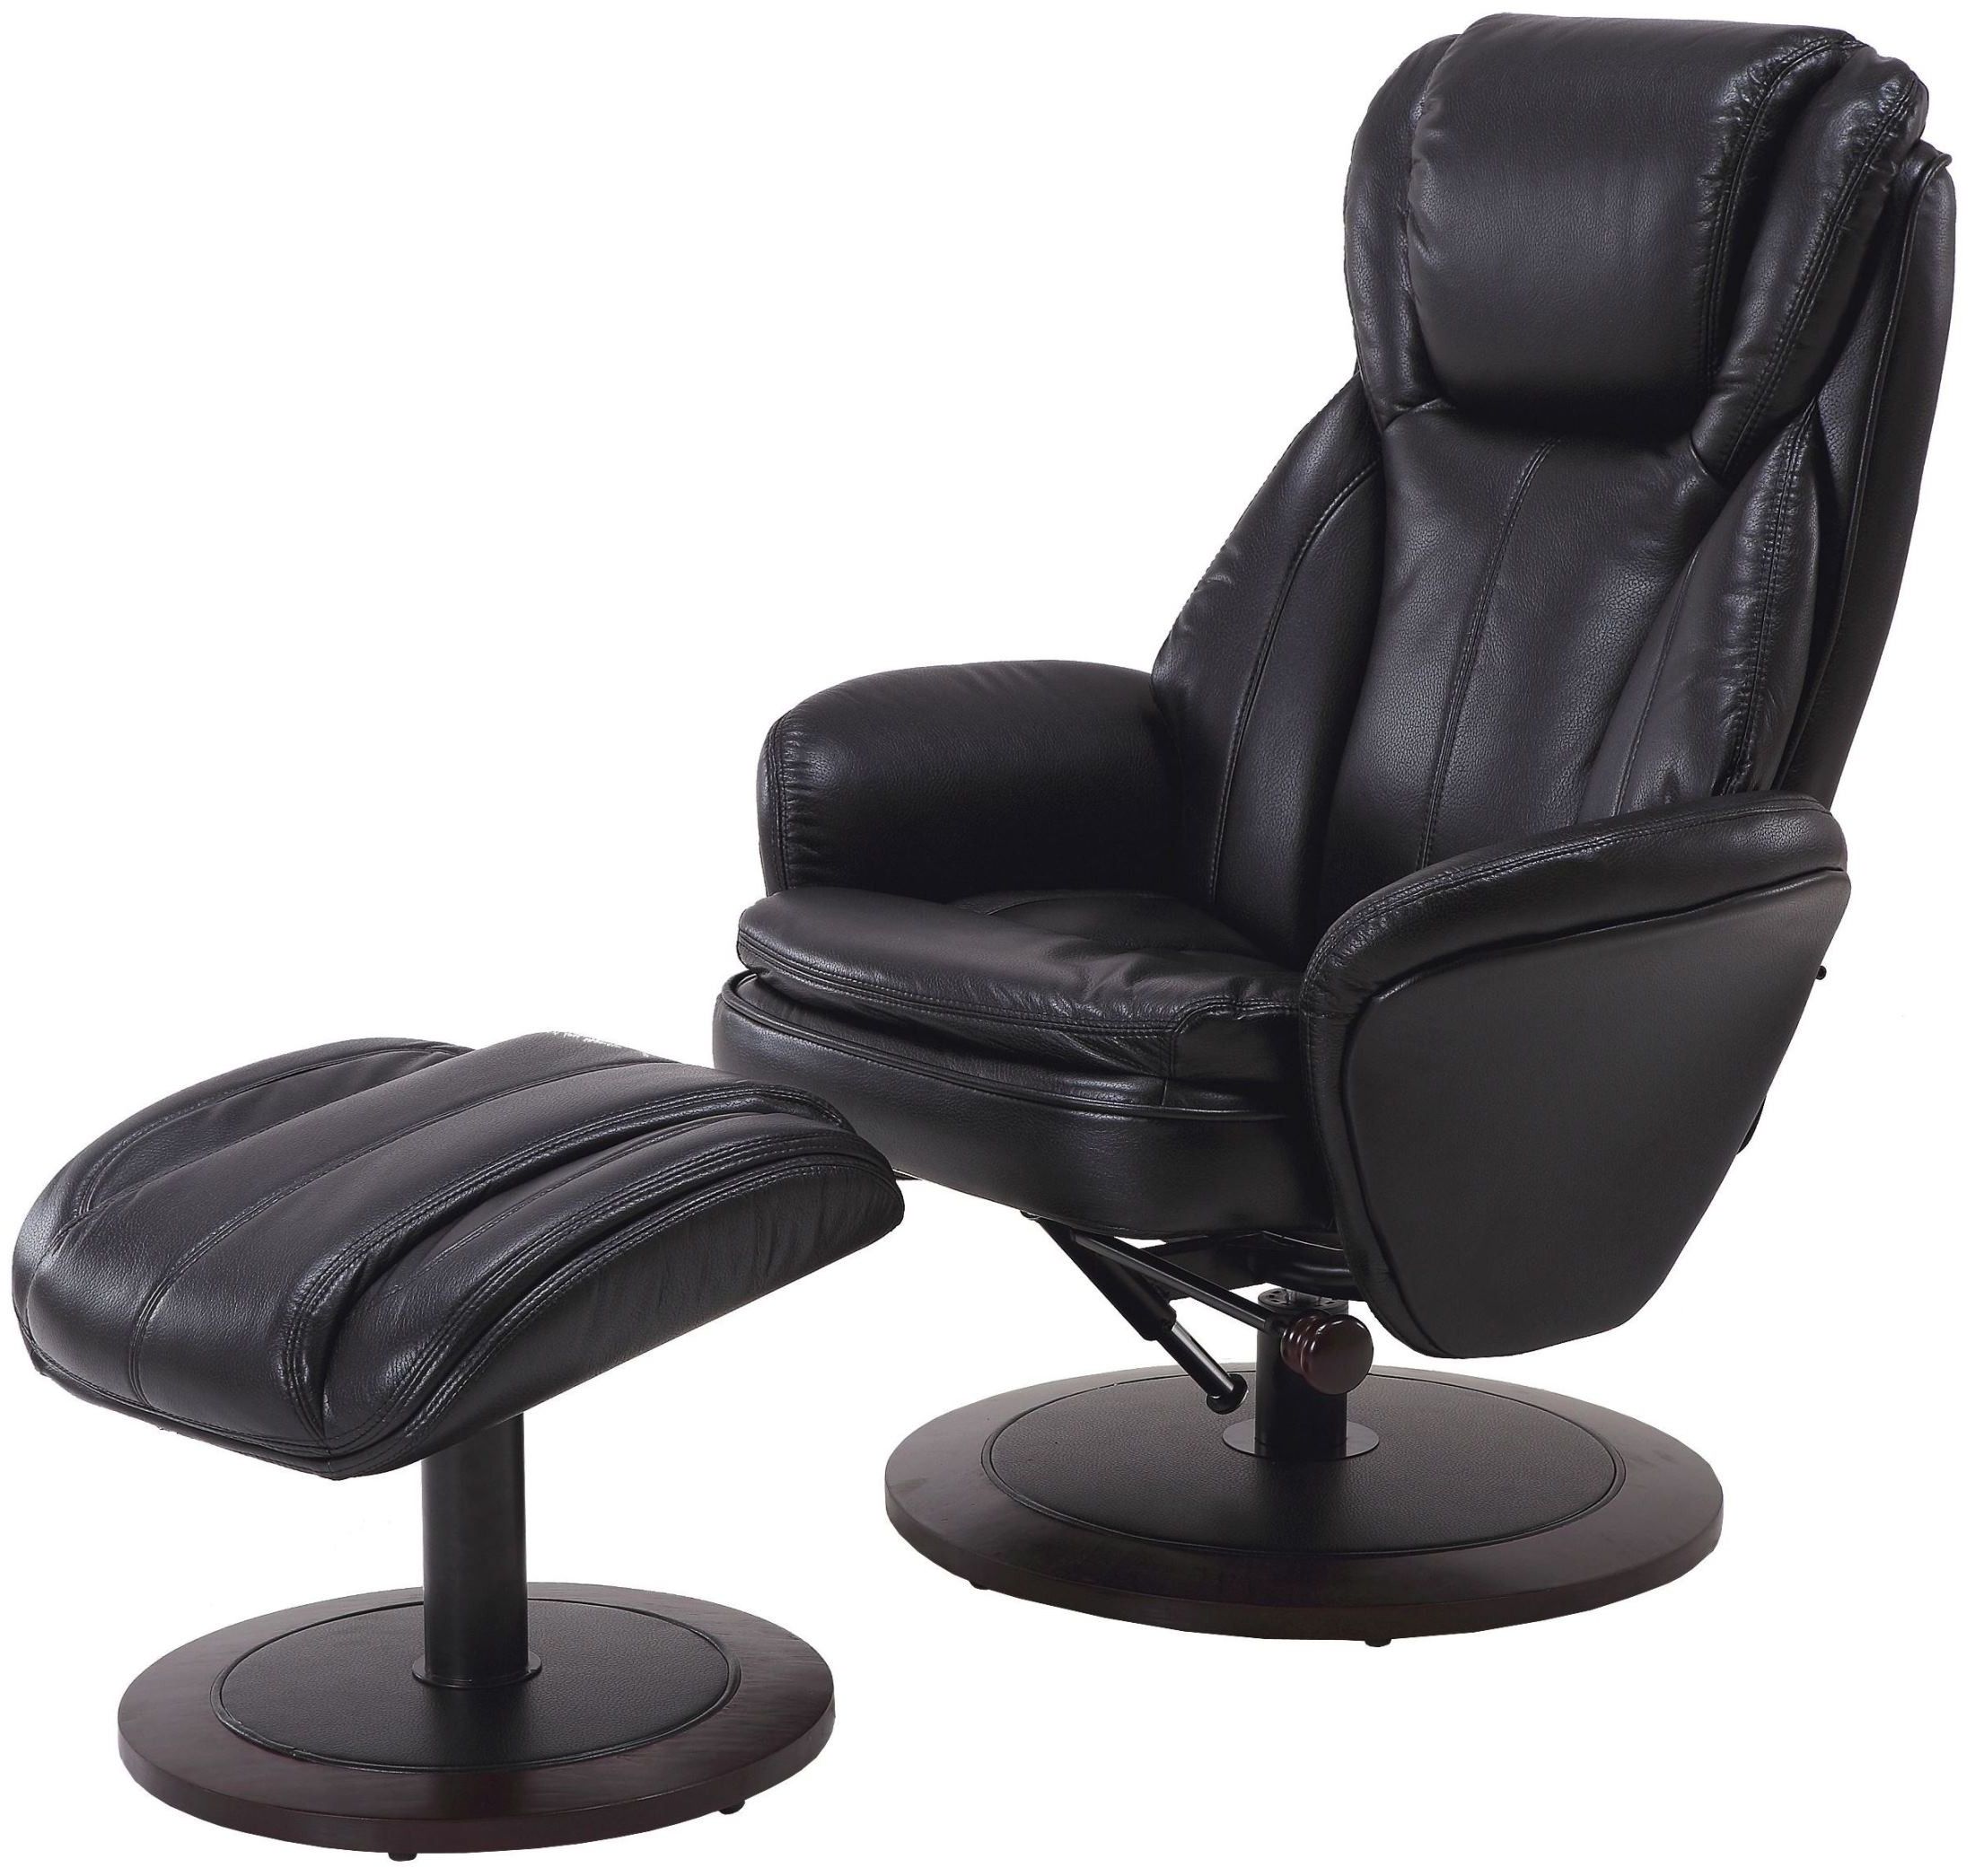 Norway Black Breathable Swivel Recliner With Ottoman From Mac Motion Regarding Widely Used Onyx Black Modern Swivel Ottomans (View 2 of 10)